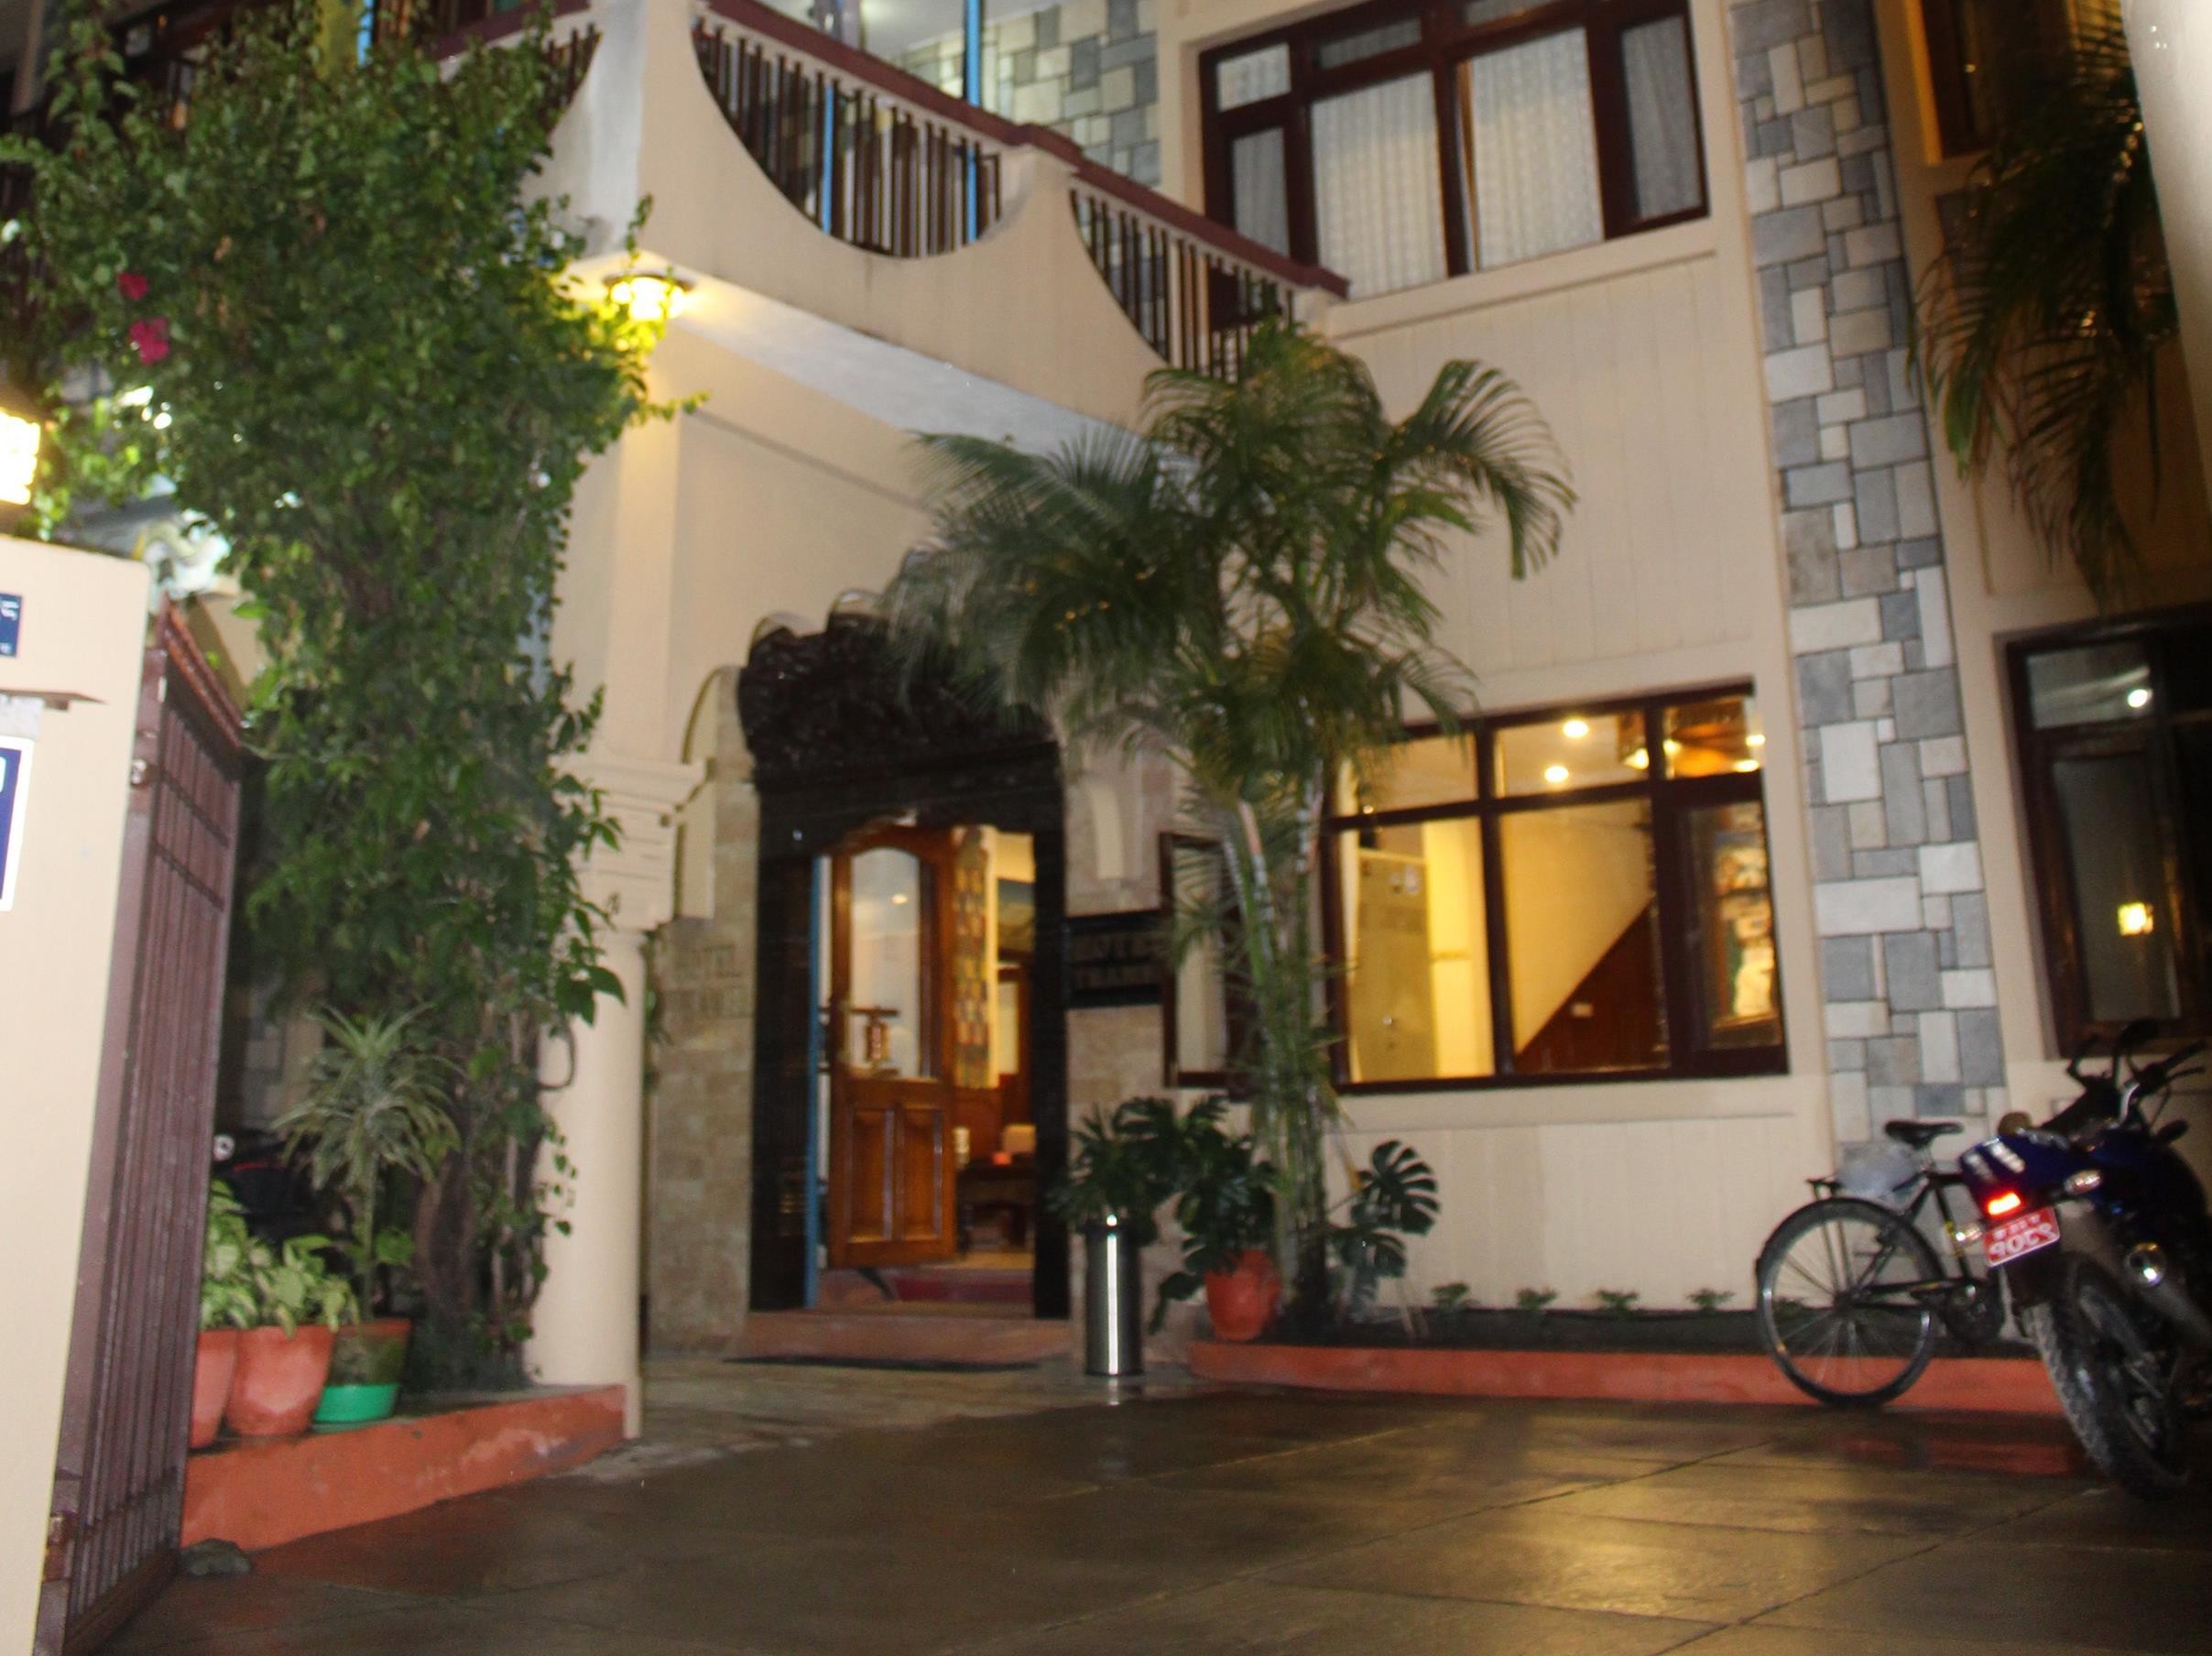 Hotel Thamel Kathmandu FAQ 2017, What facilities are there in Hotel Thamel Kathmandu 2017, What Languages Spoken are Supported in Hotel Thamel Kathmandu 2017, Which payment cards are accepted in Hotel Thamel Kathmandu , Kathmandu Hotel Thamel room facilities and services Q&A 2017, Kathmandu Hotel Thamel online booking services 2017, Kathmandu Hotel Thamel address 2017, Kathmandu Hotel Thamel telephone number 2017,Kathmandu Hotel Thamel map 2017, Kathmandu Hotel Thamel traffic guide 2017, how to go Kathmandu Hotel Thamel, Kathmandu Hotel Thamel booking online 2017, Kathmandu Hotel Thamel room types 2017.